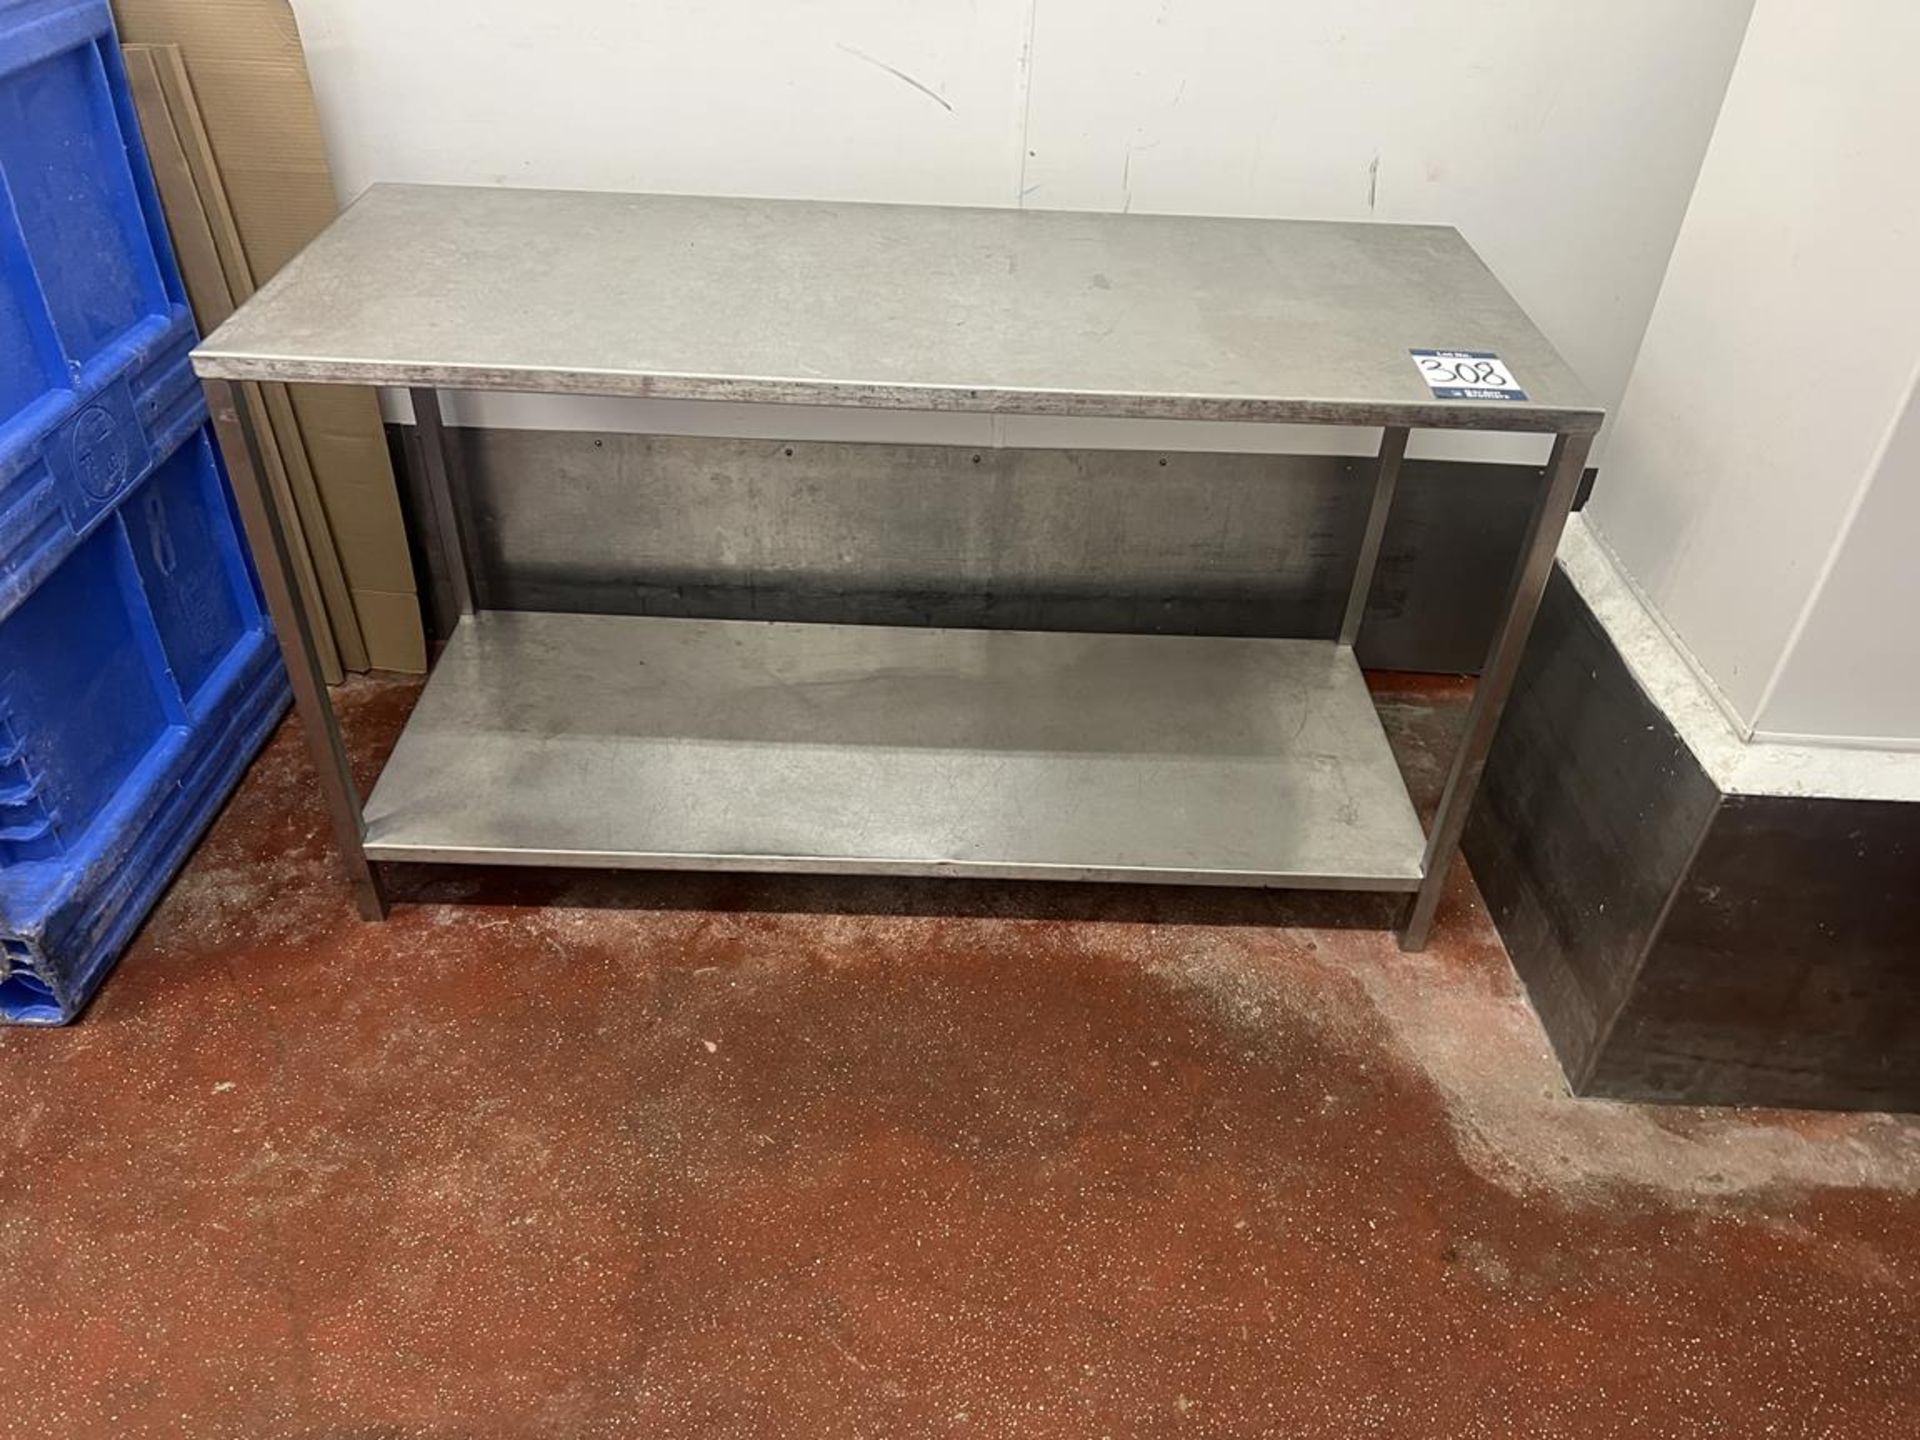 Stainless steel preparation table, approx. 1500x600x840mm - Image 2 of 3